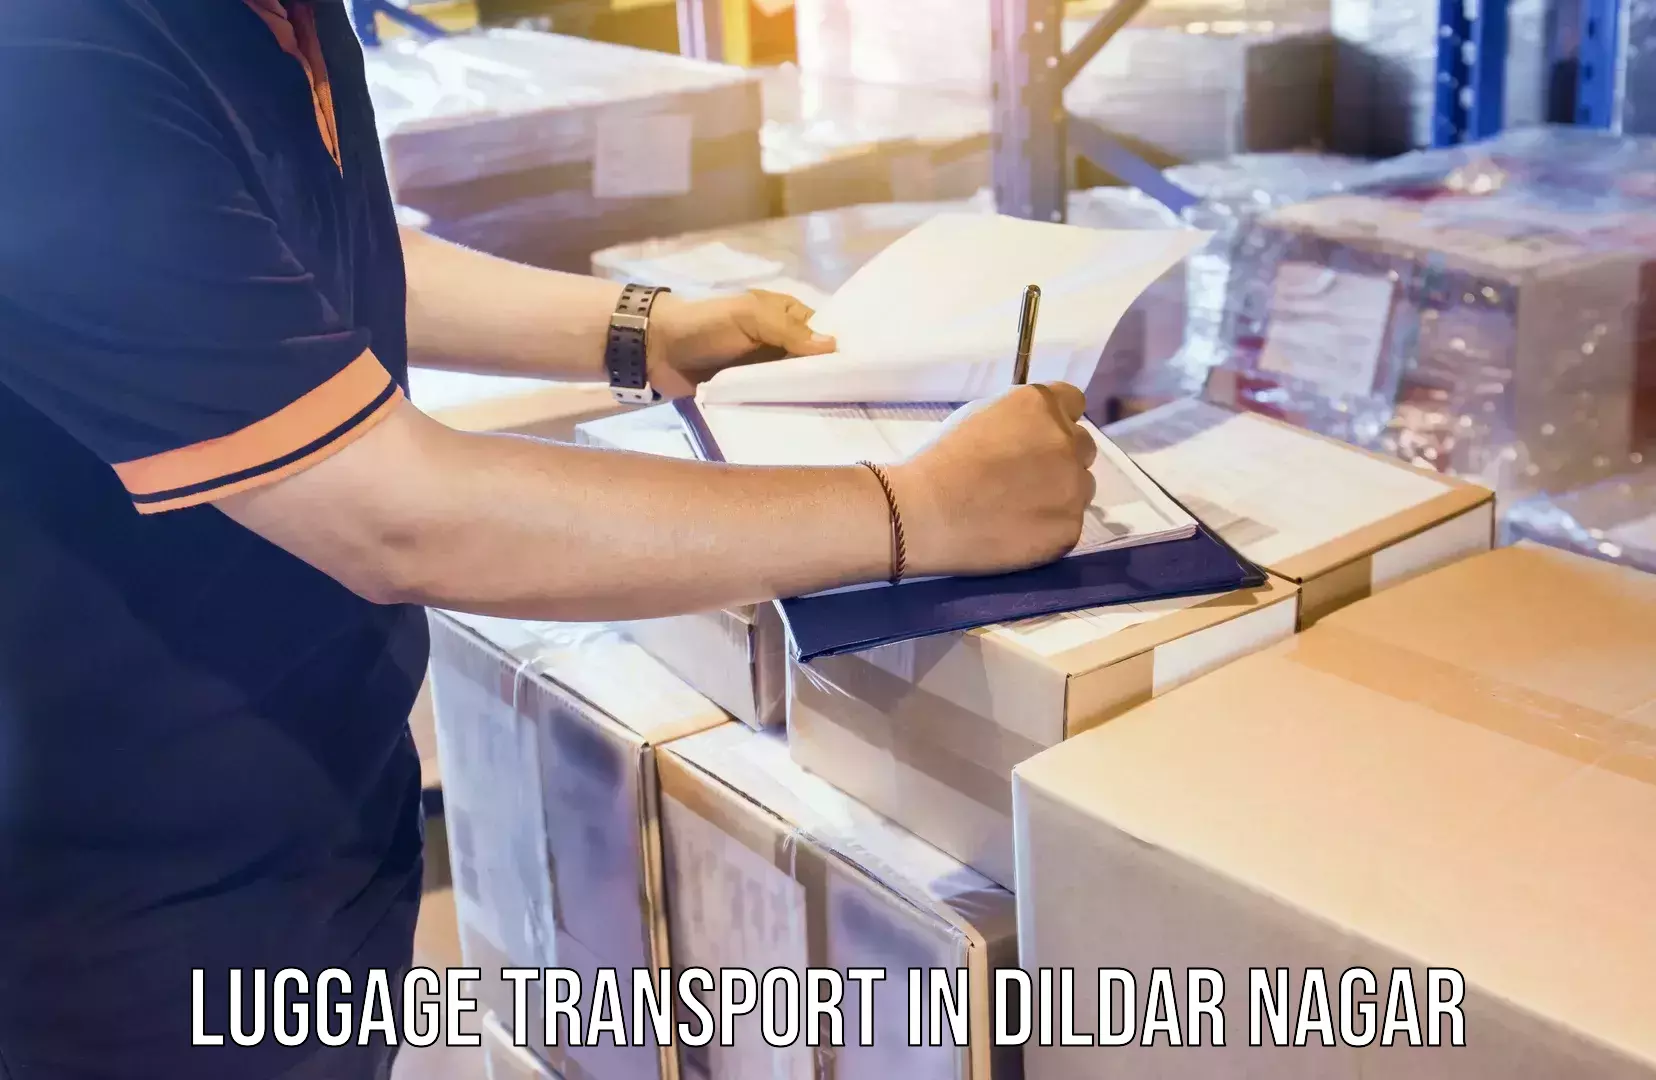 Luggage transport consulting in Dildar Nagar